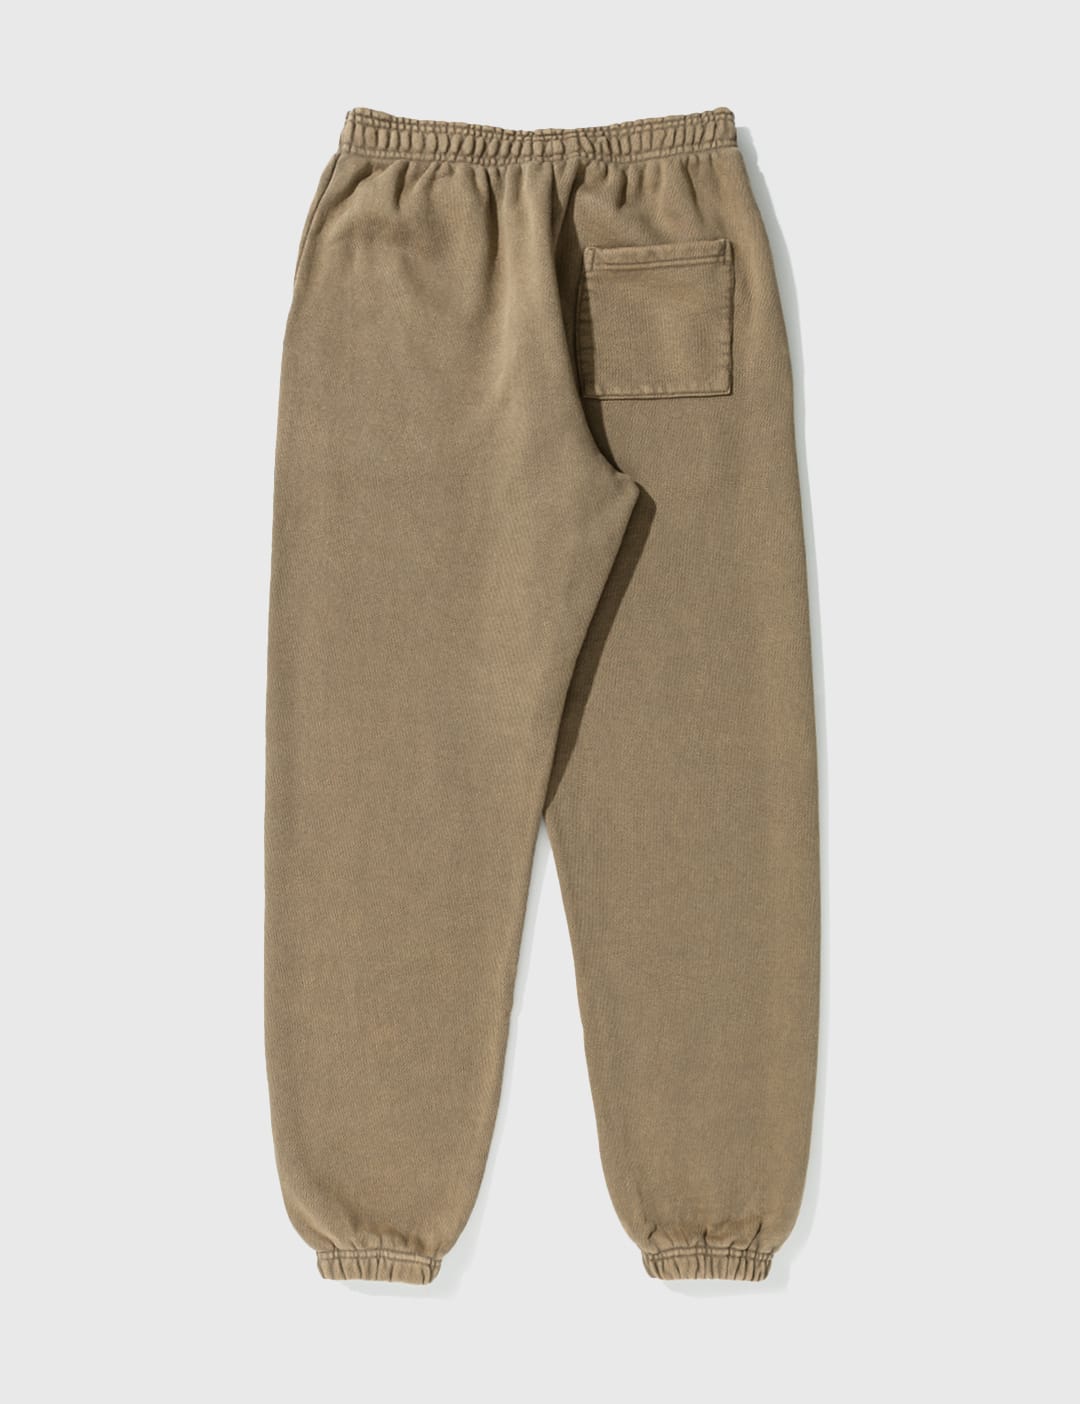 Entire Studios - HEAVY SWEATPANTS | HBX - Globally Curated Fashion 